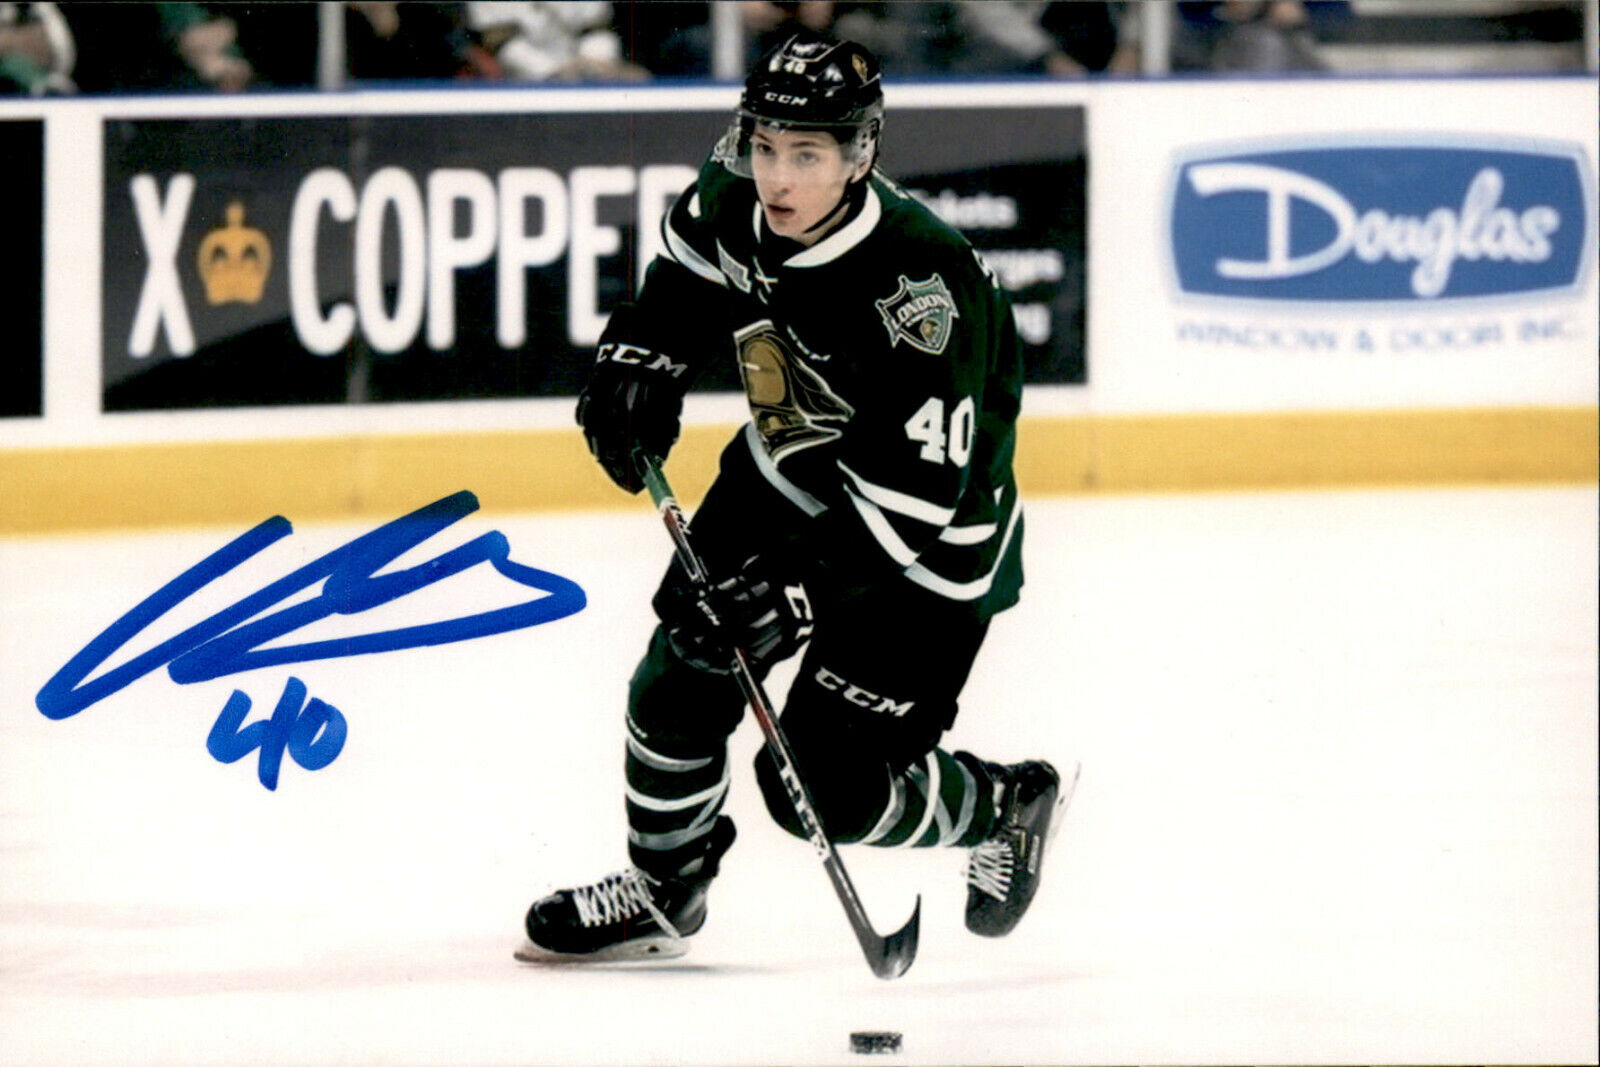 Antonio Stranges SIGNED autographed 4x6 Photo Poster painting LONDON KNIGHTS / DALLAS STARS #4